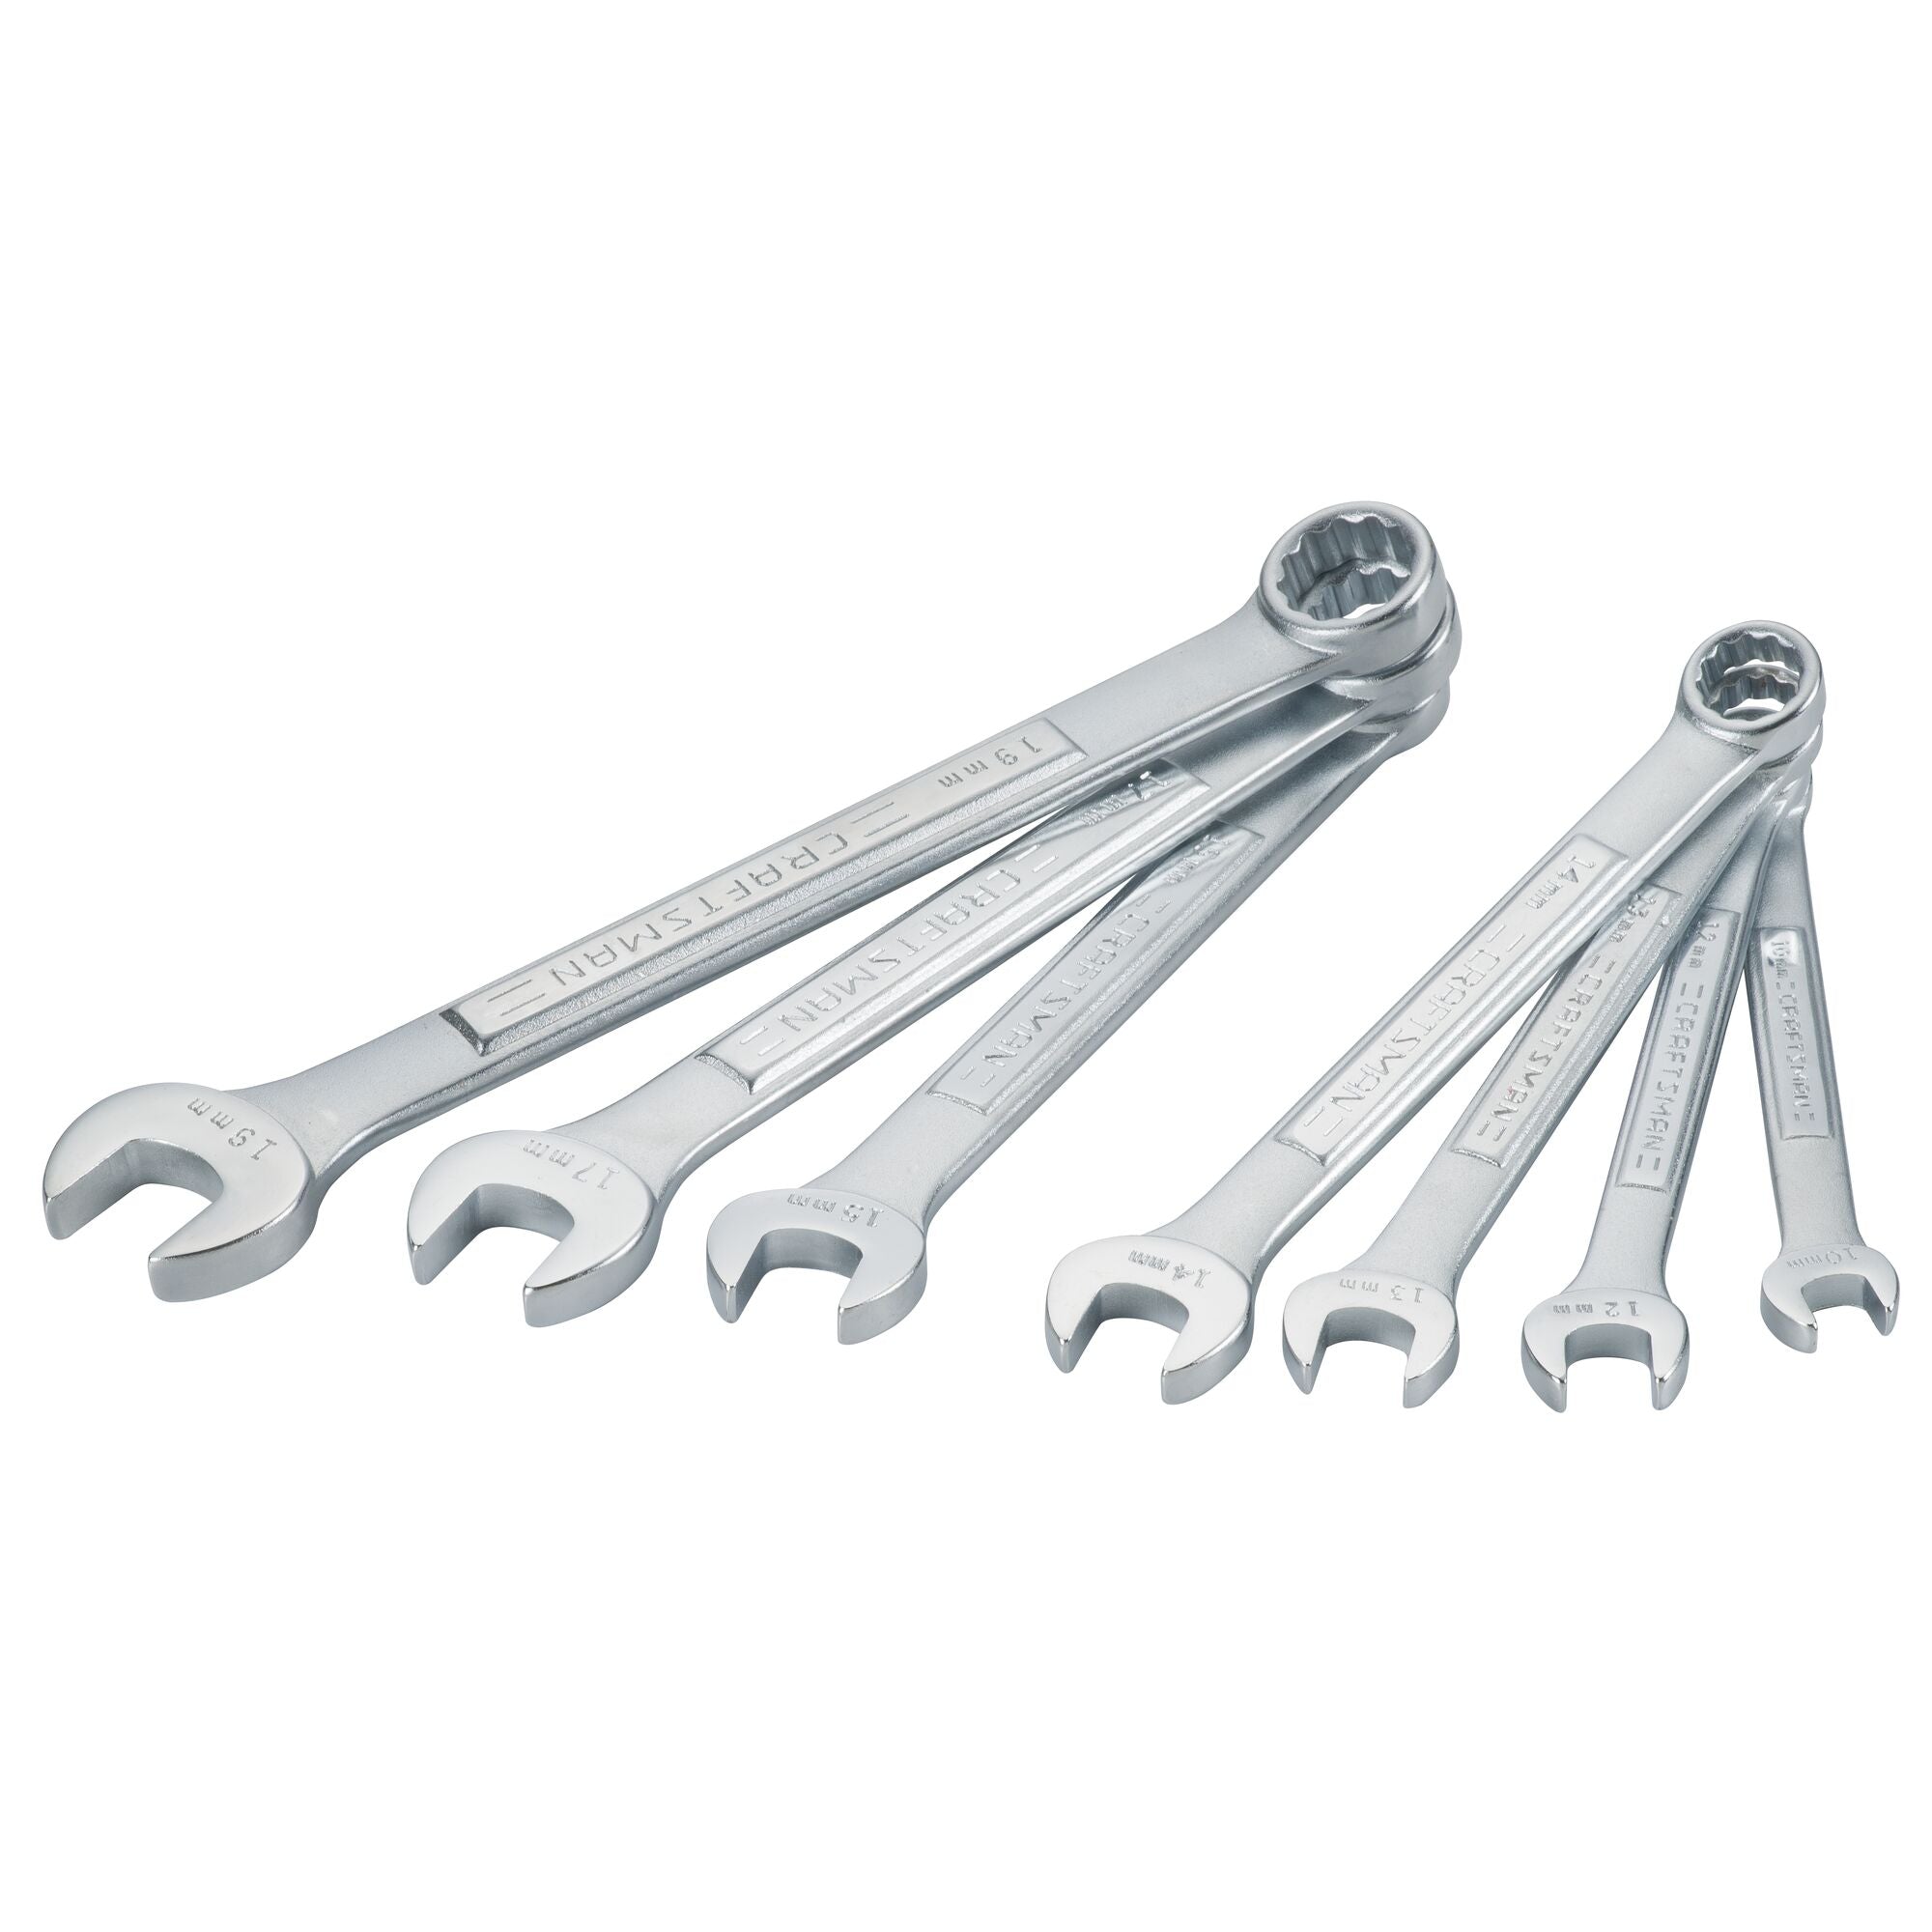 Combination Wrench Set 4 - 7.5 Mm Ref. Bahco 3280m